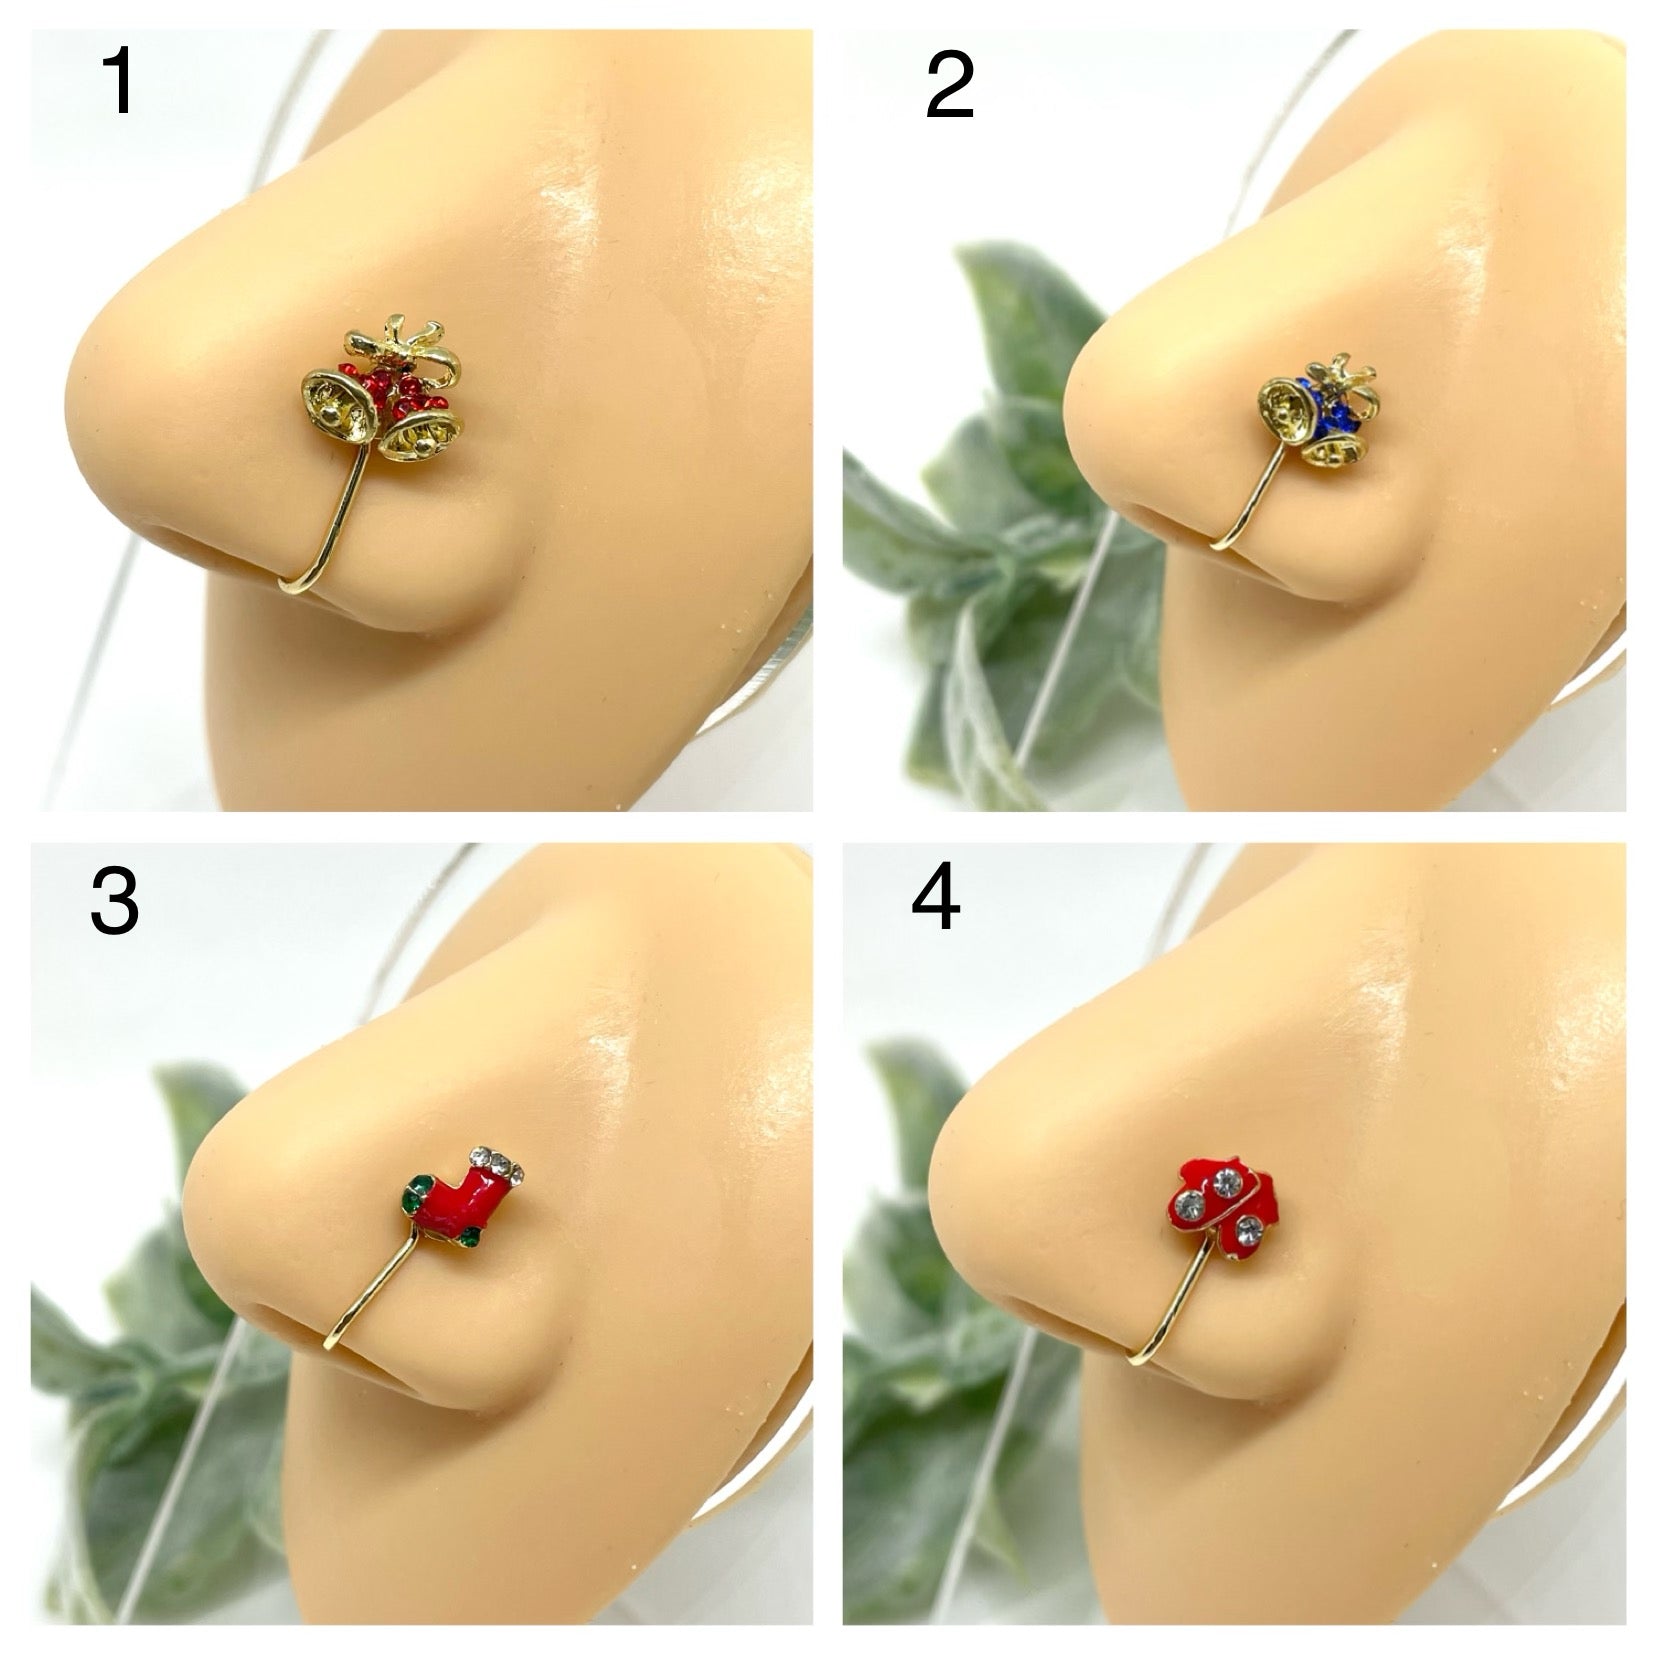 Holiday Theme Nose Cuffs - Fake Piercings